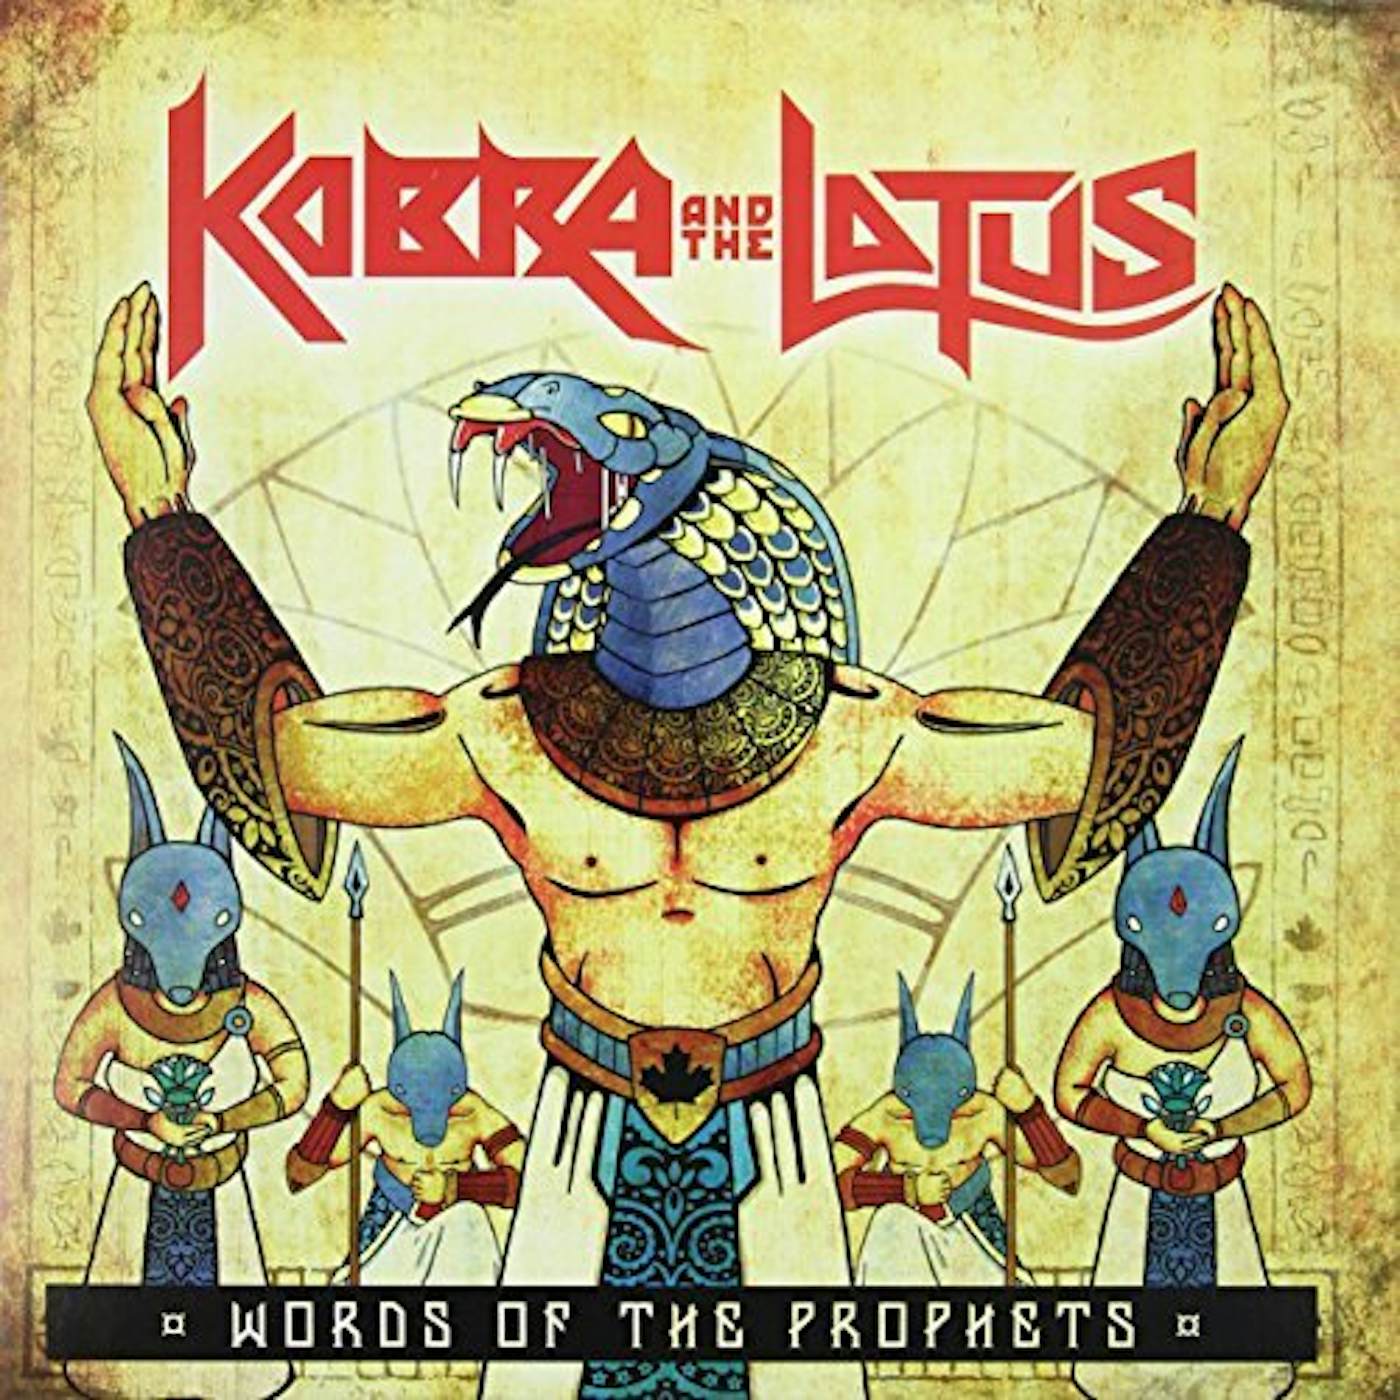 Kobra And The Lotus Words of the Prophets Vinyl Record